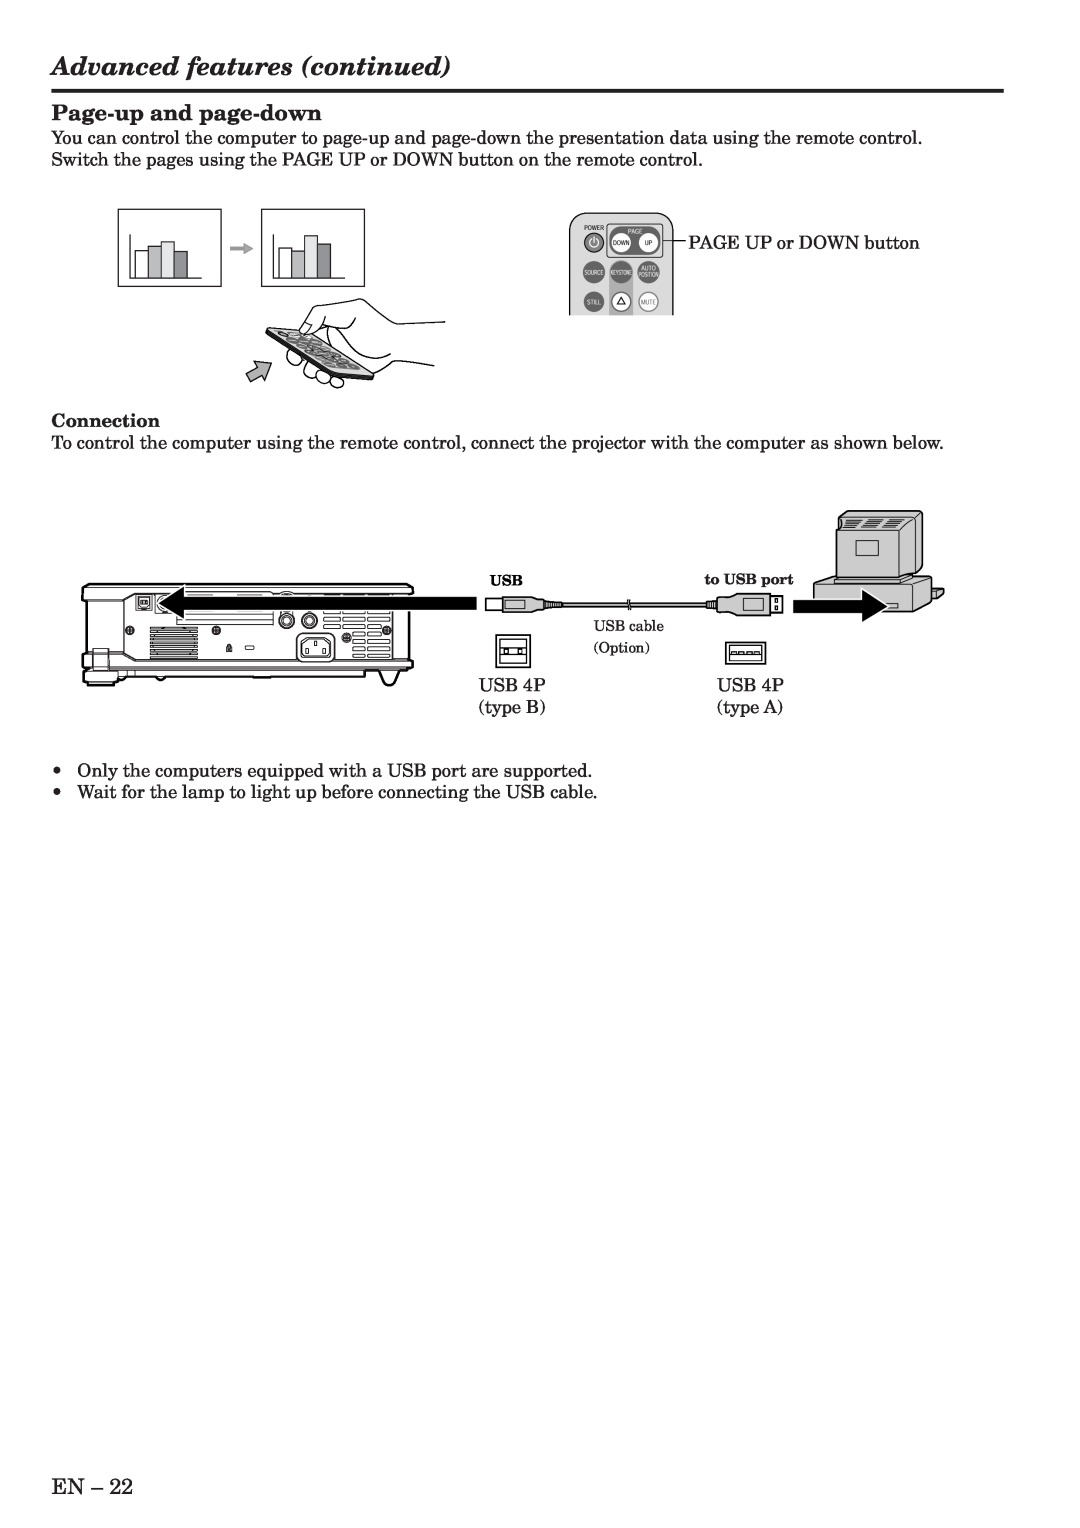 Mitsubishi Electronics XL5U user manual Advanced features continued, Page-up and page-down, Connection 